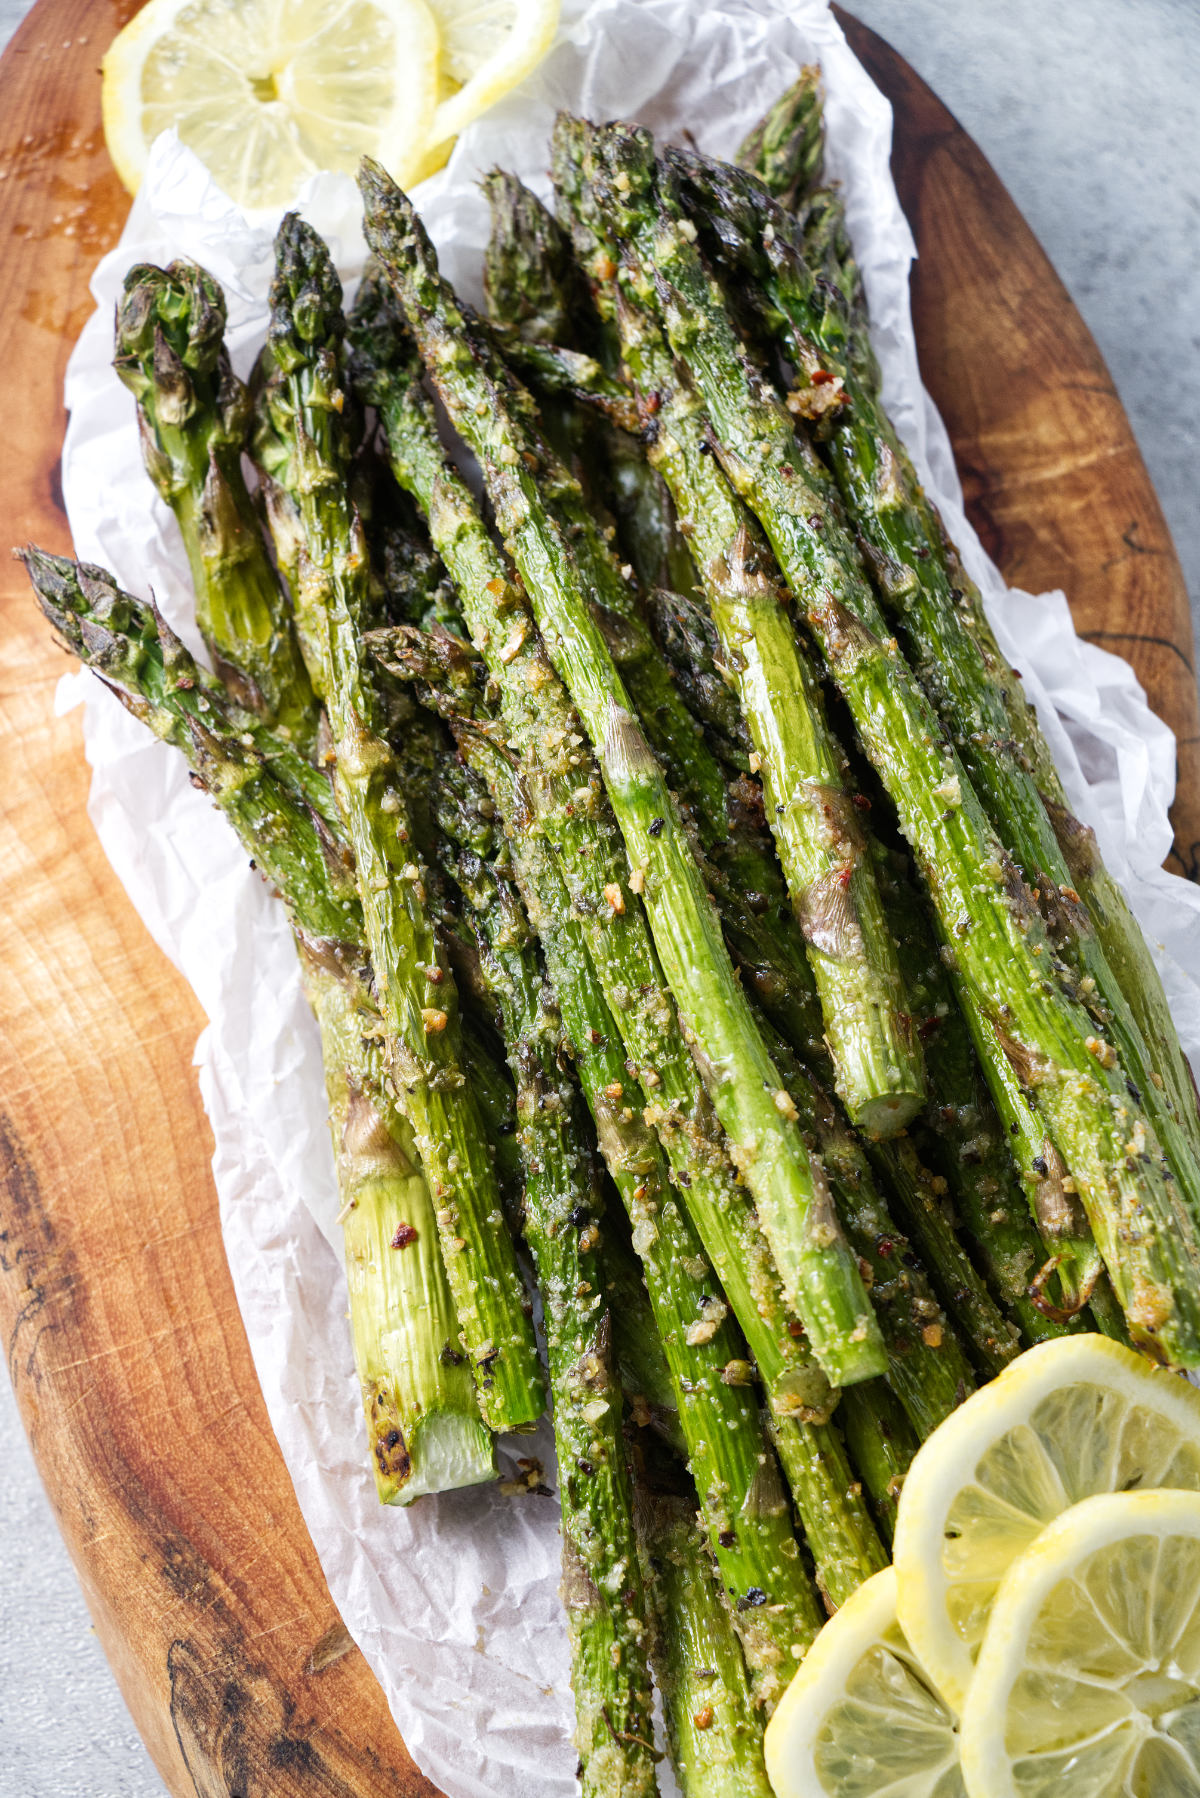 Grilled asparagus with lemon slices.